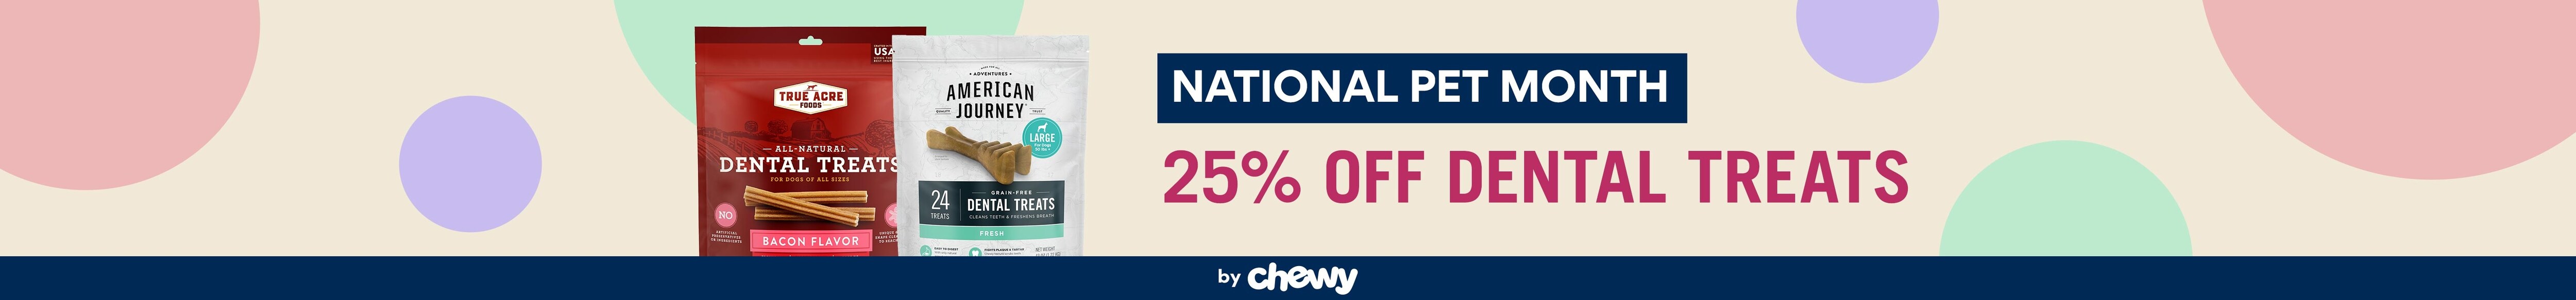 National Pet Month. Reward Your #1. Celebrate with savings on dental treats by Chewy.